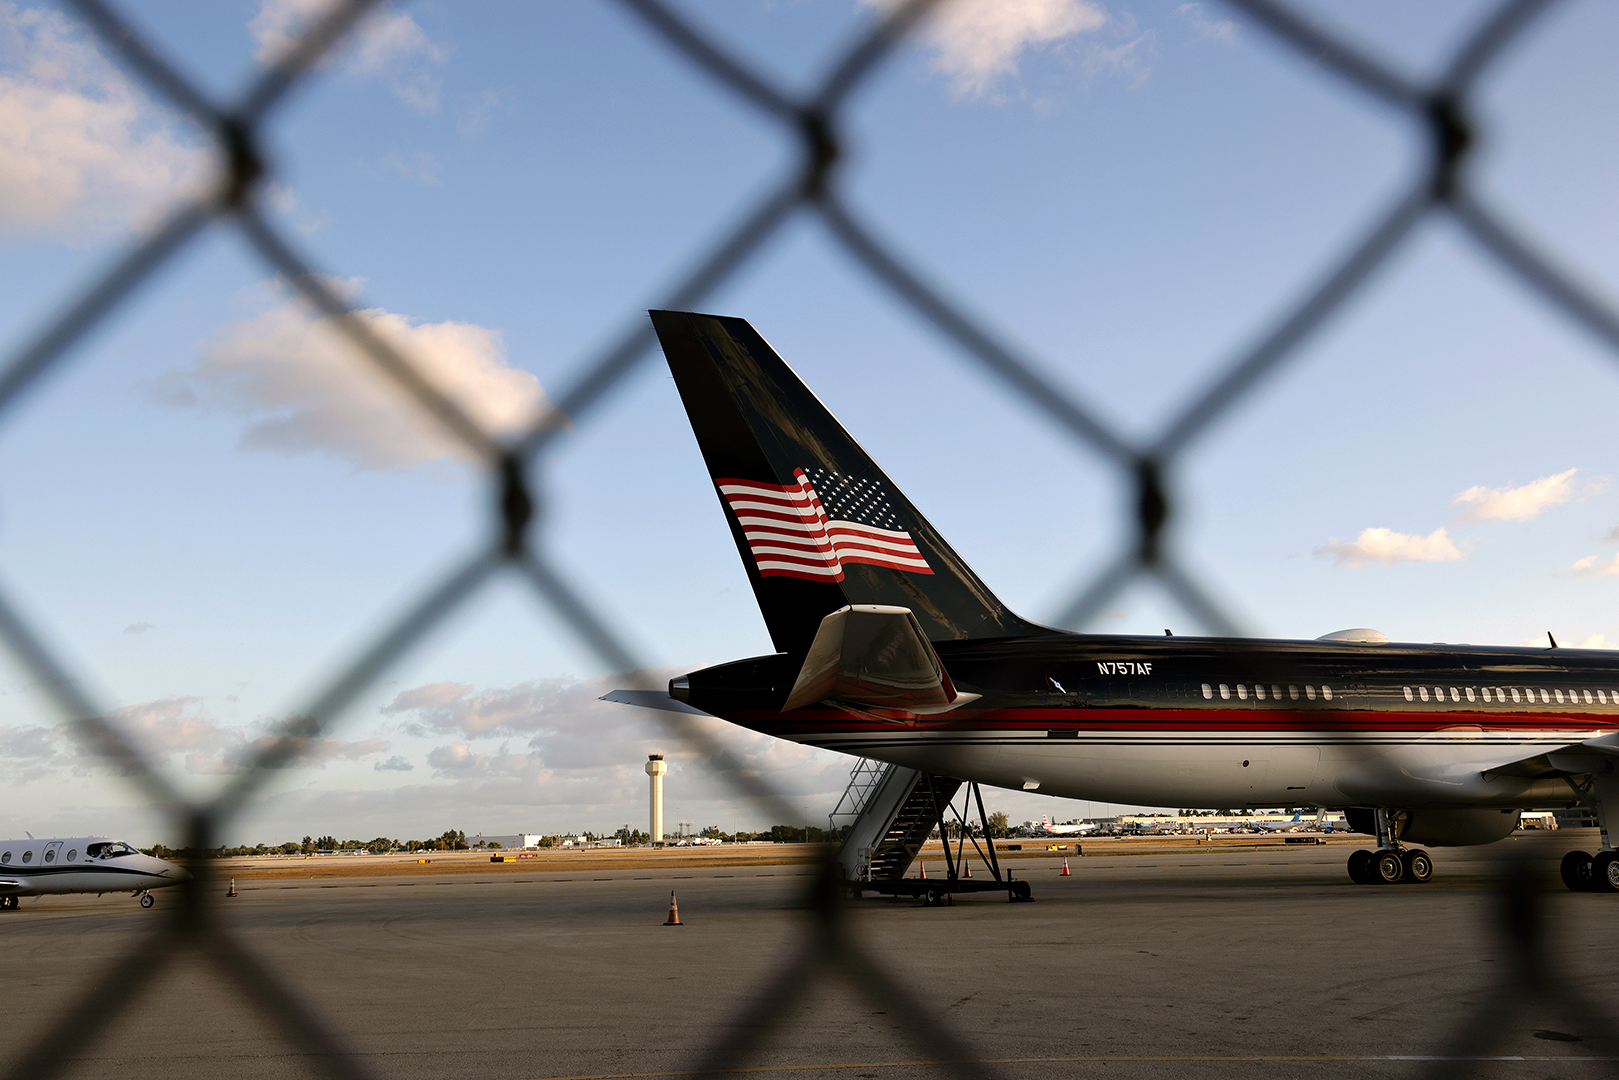 Seen through a security fence, the Trump Organization's Boeing 757 used by former U.S. President Donald Trump, known as Trump Force One, sits parked on the tarmac at the Palm Beach International Airport on March 31 in West Palm Beach, Florida.